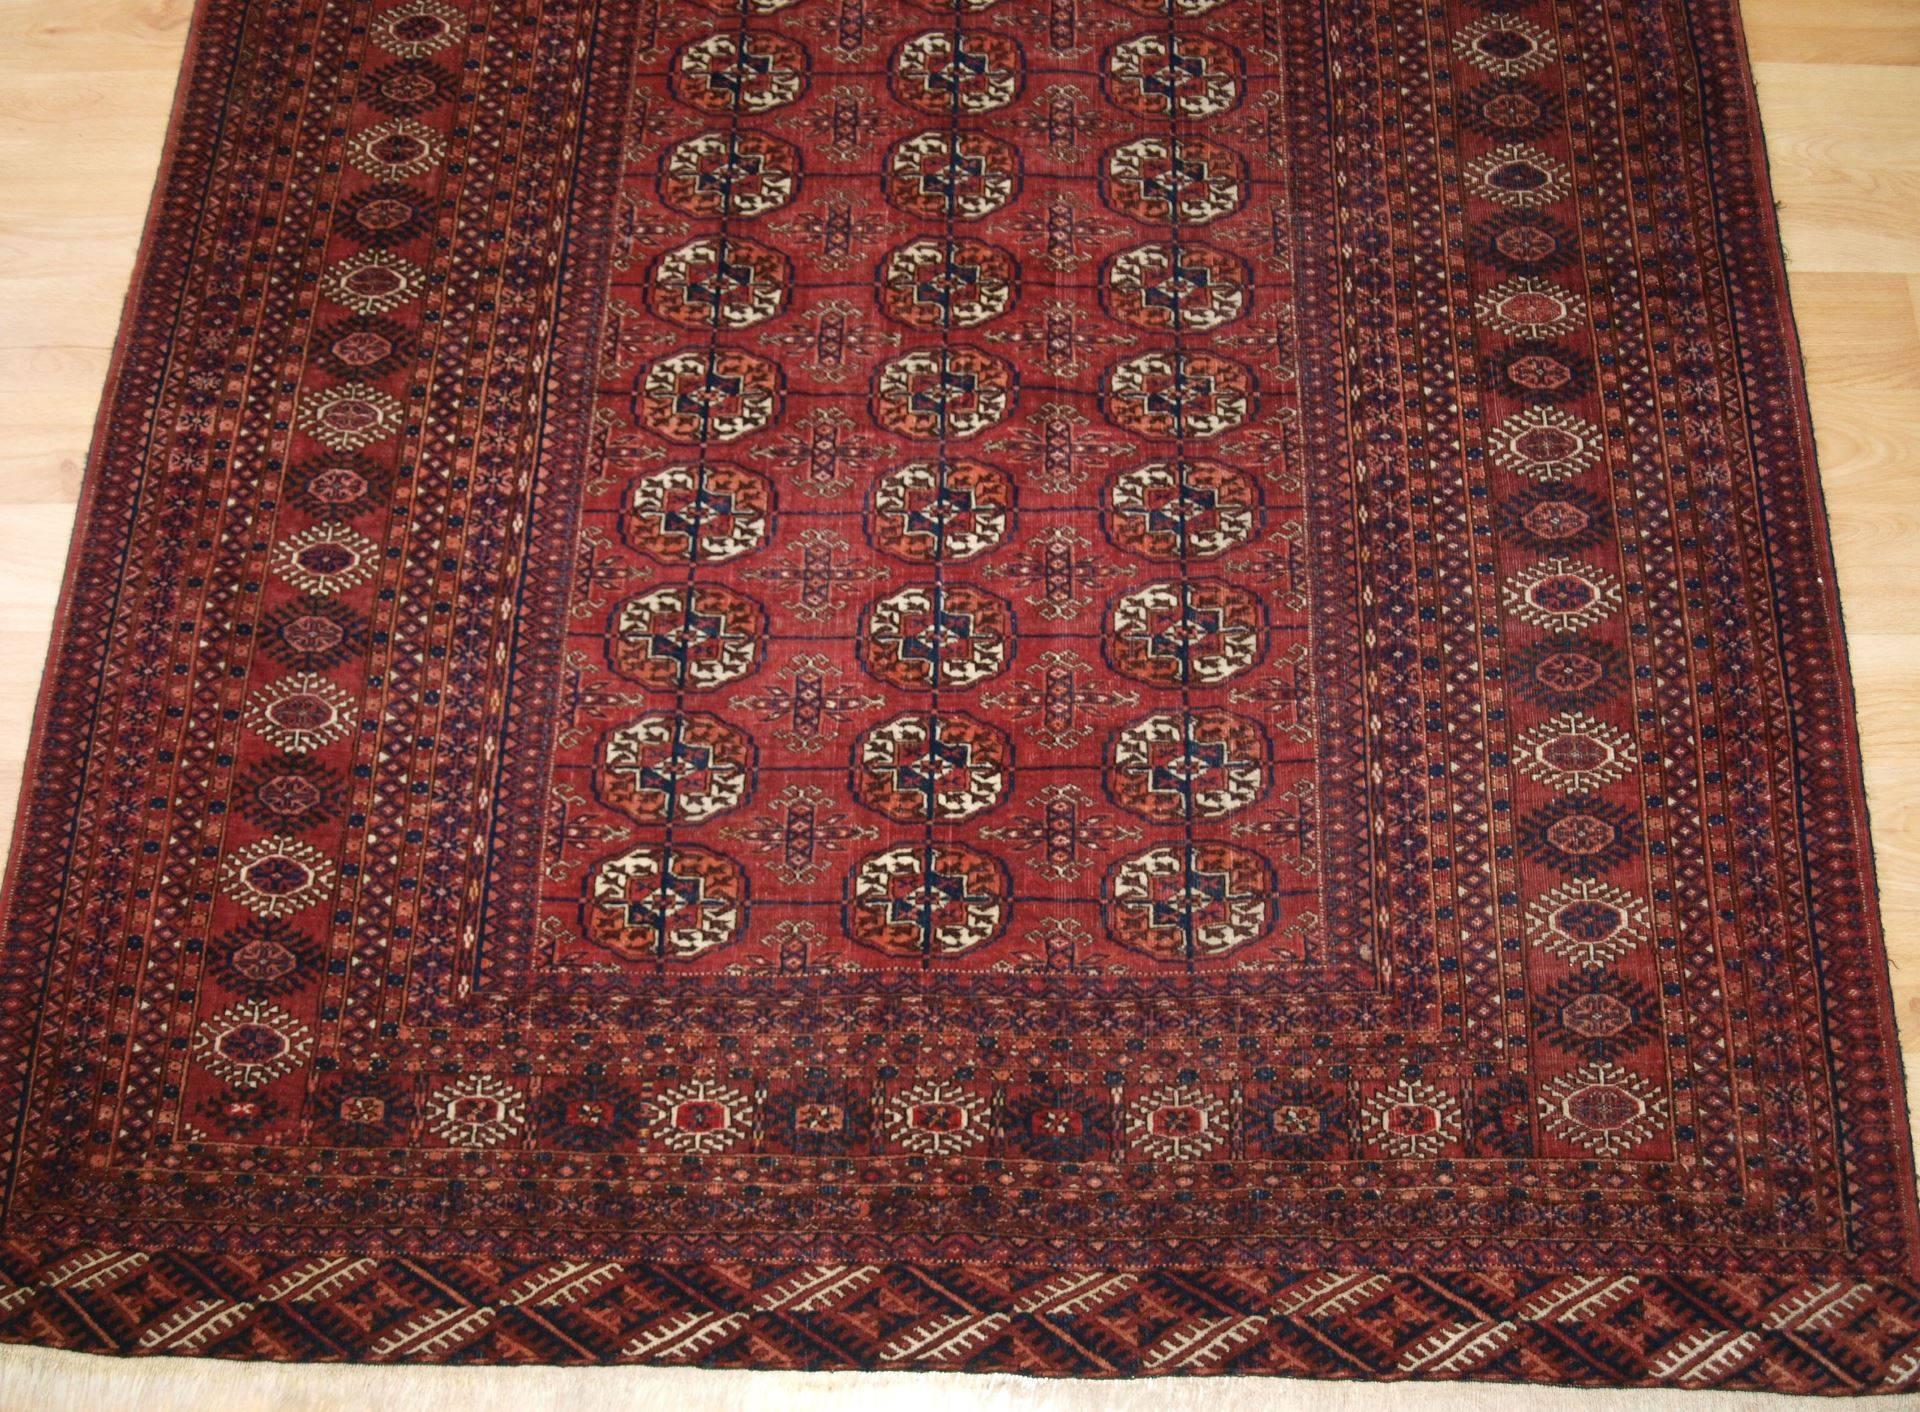 Antique Tekke Turkmen rug, excellent condition with good color, circa 1900.
Size: 5ft 9in x 4ft 1in (175 x 125cm).

Antique Tekke Turkmen rug of excellent design and color, fine weave and small size; the rug is of a soft red color. 

  

The